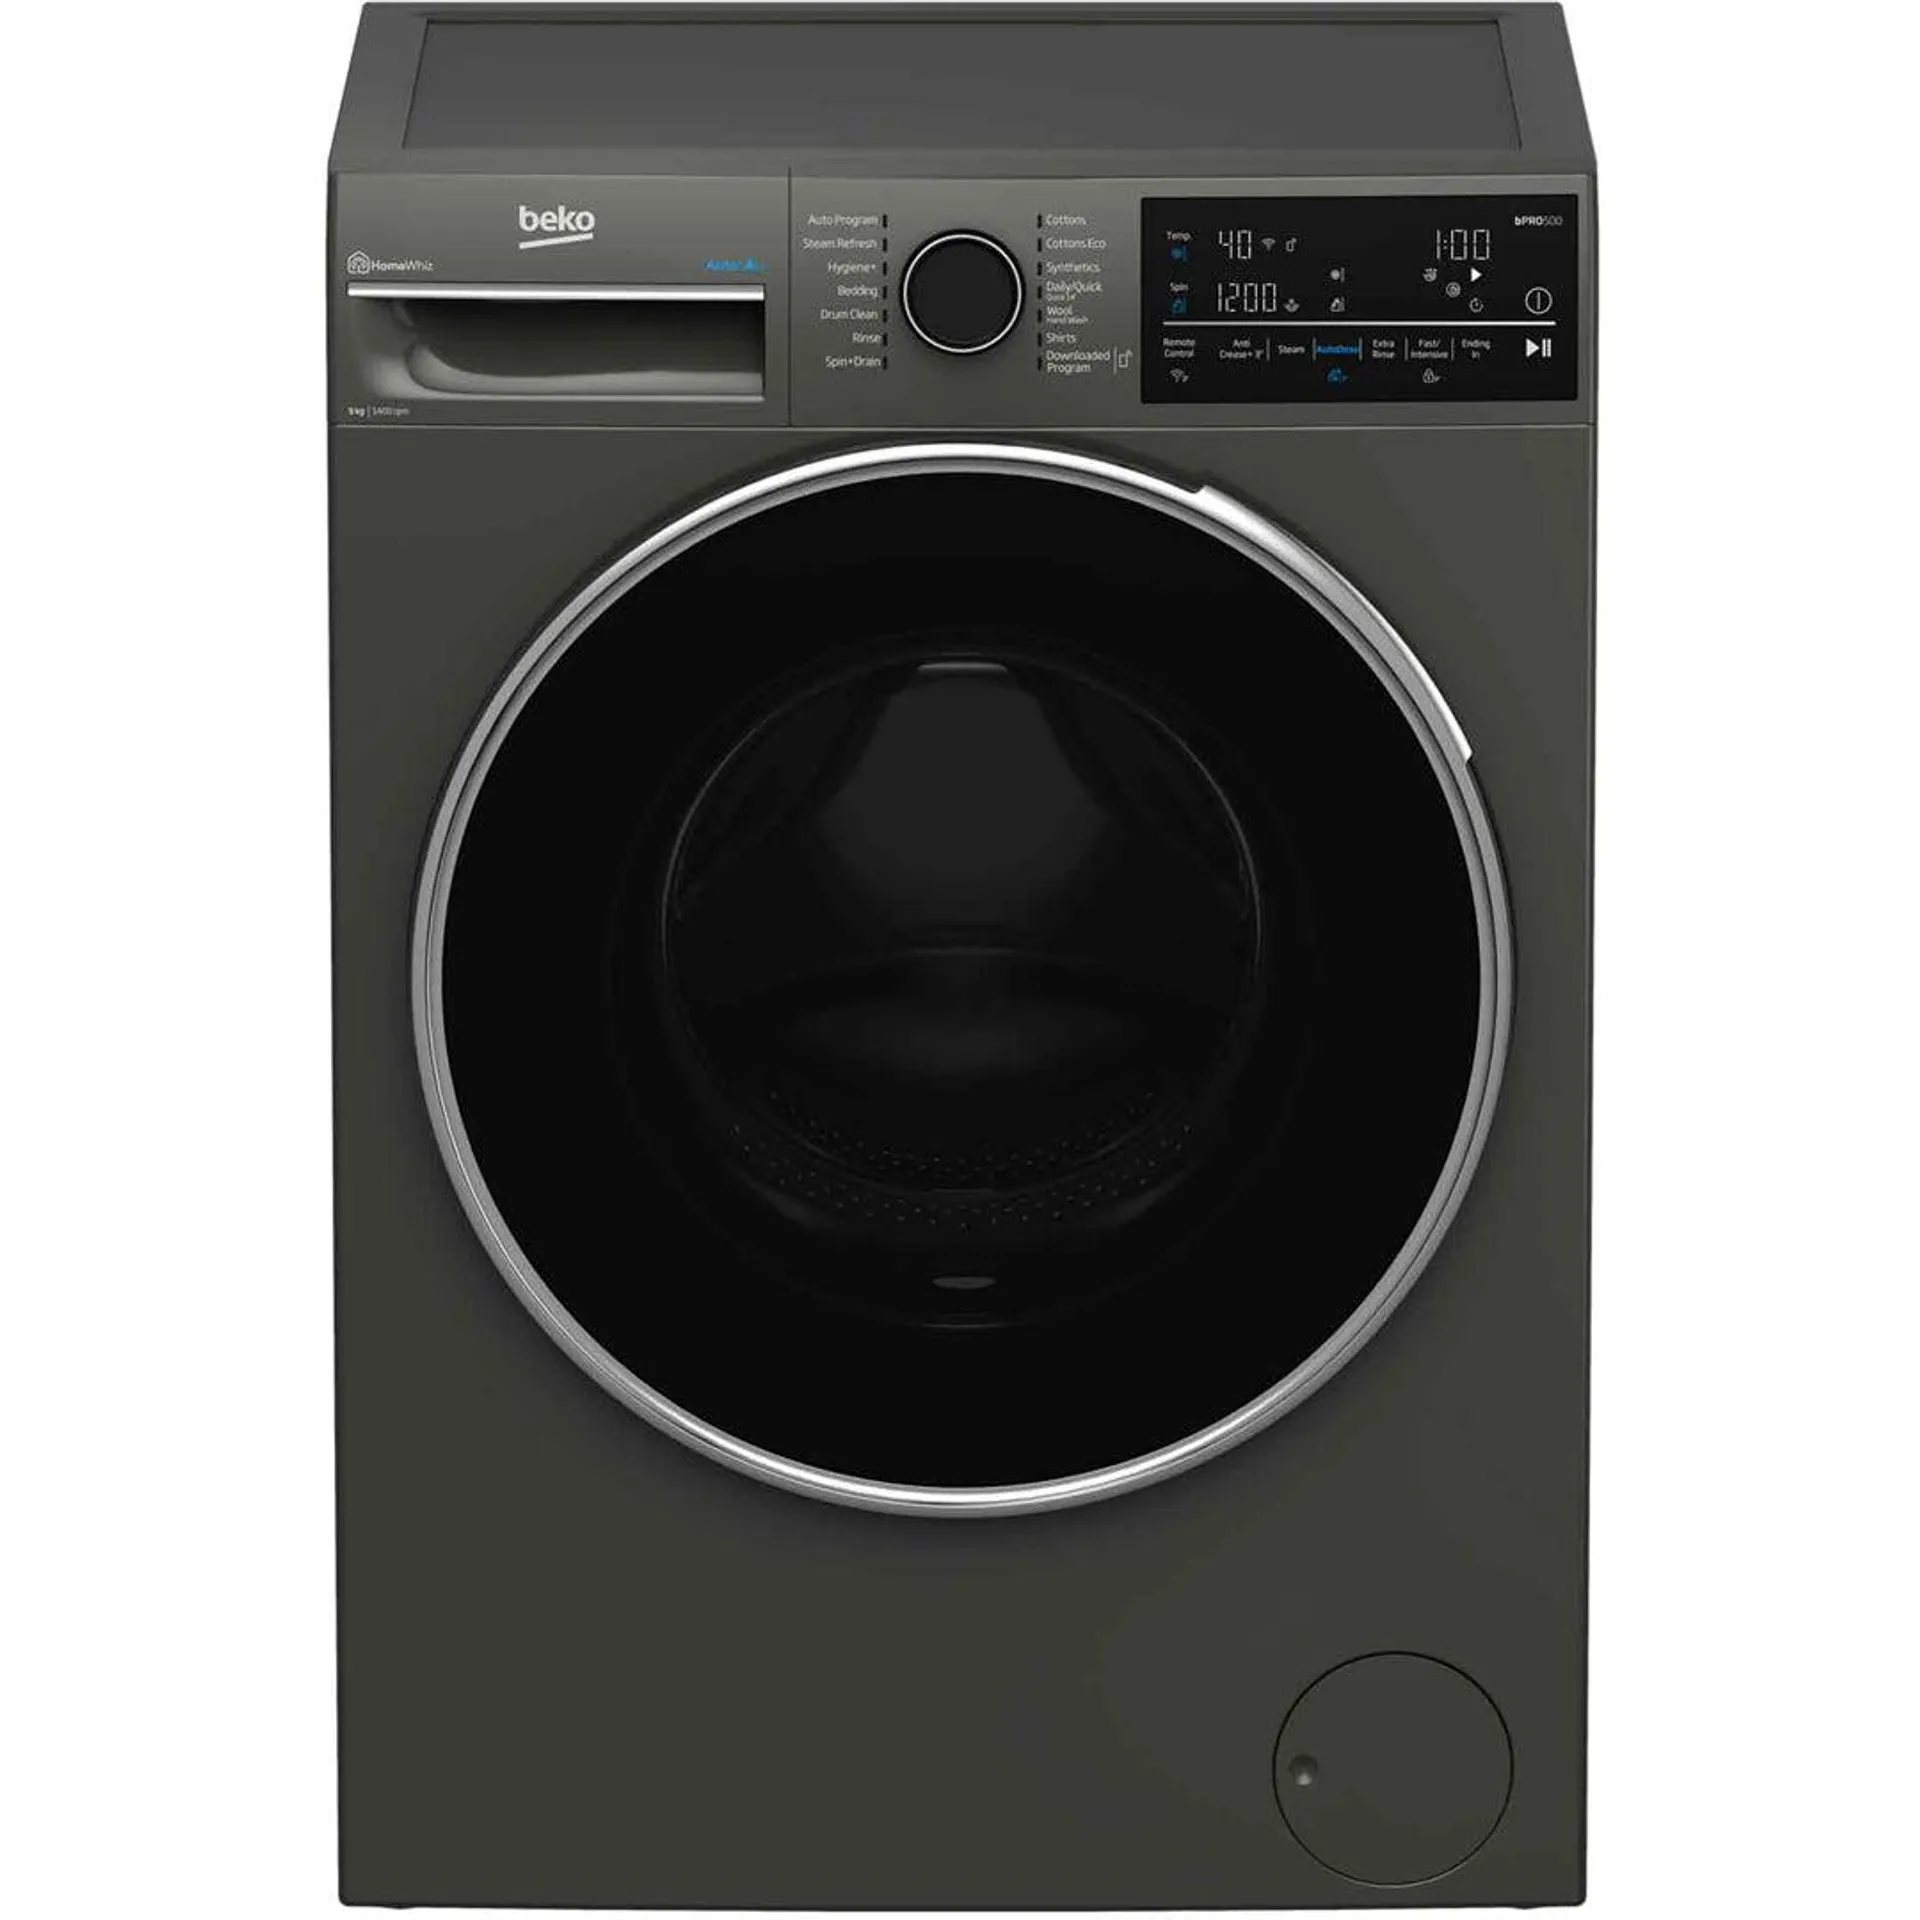 Beko 9 kg Autodose Wifi Connected Washing Machine with Steam